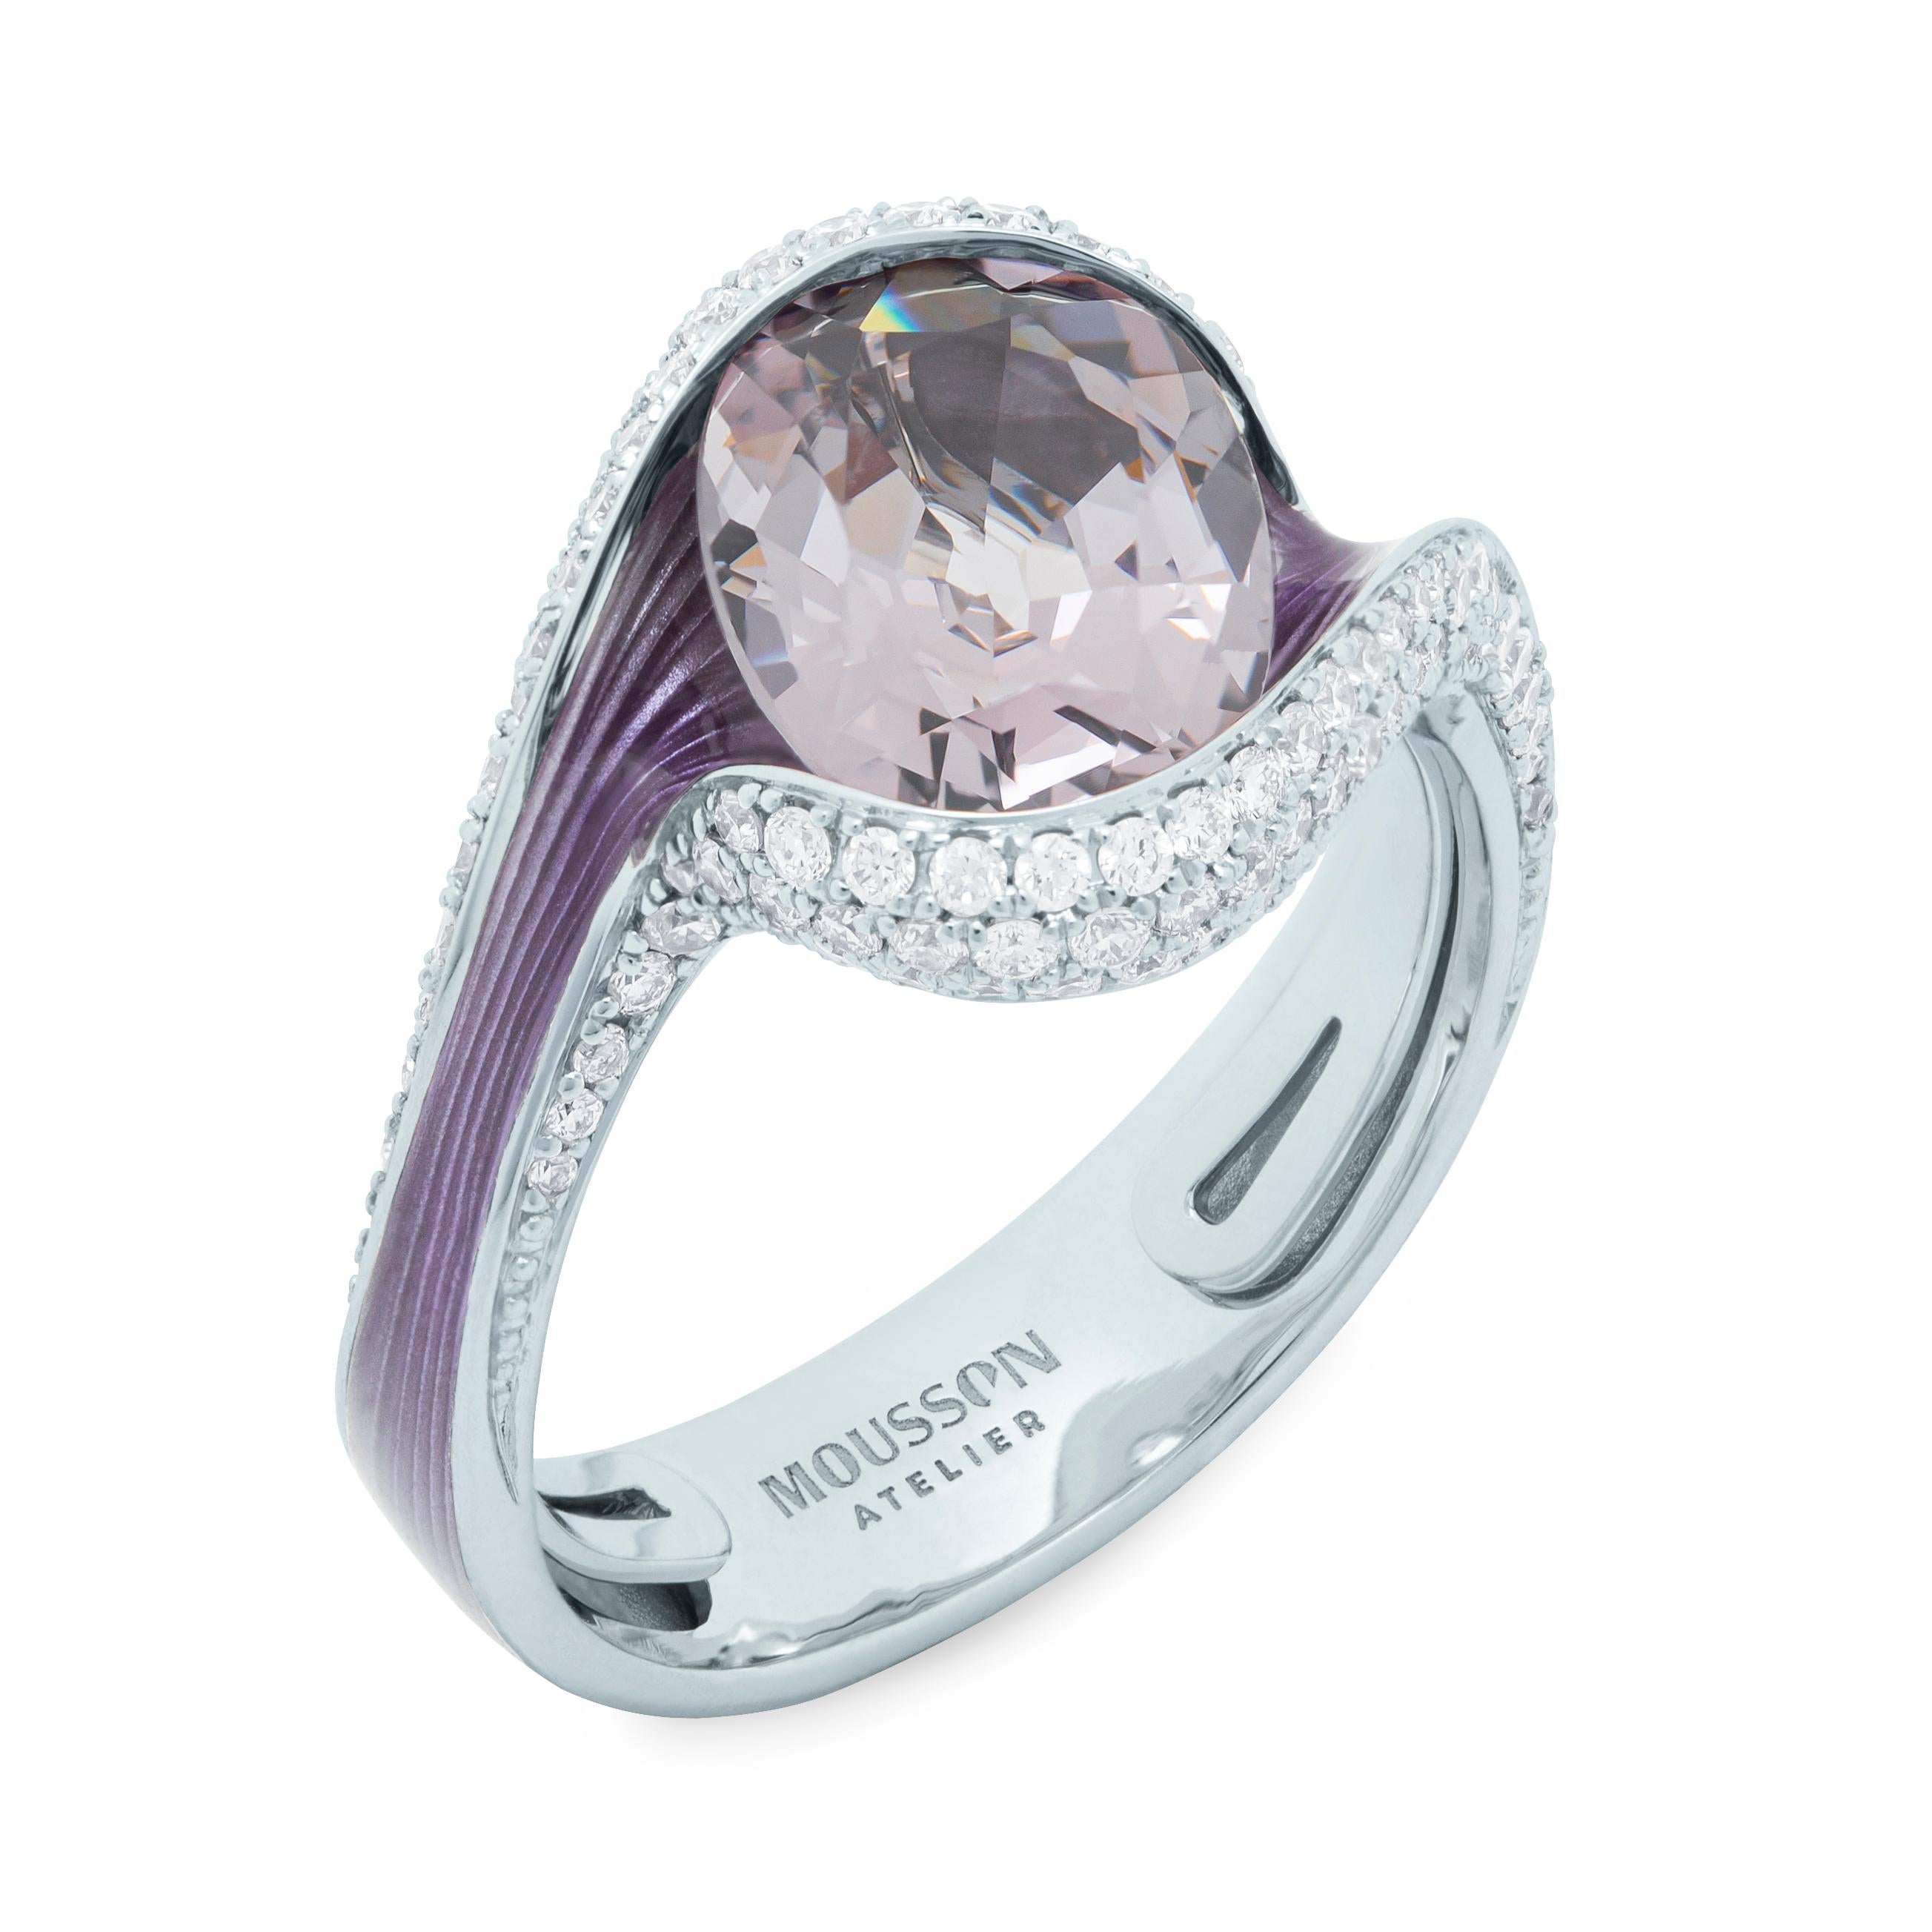 Spinel 2.95 Carat Diamonds Enamel 18 Karat White Gold Melted Colors Ring
Introducing our new Ring from so popular Melted Colors Collection. This collection is filled with all the colors of the rainbow. All stones are perfectly matched in color with